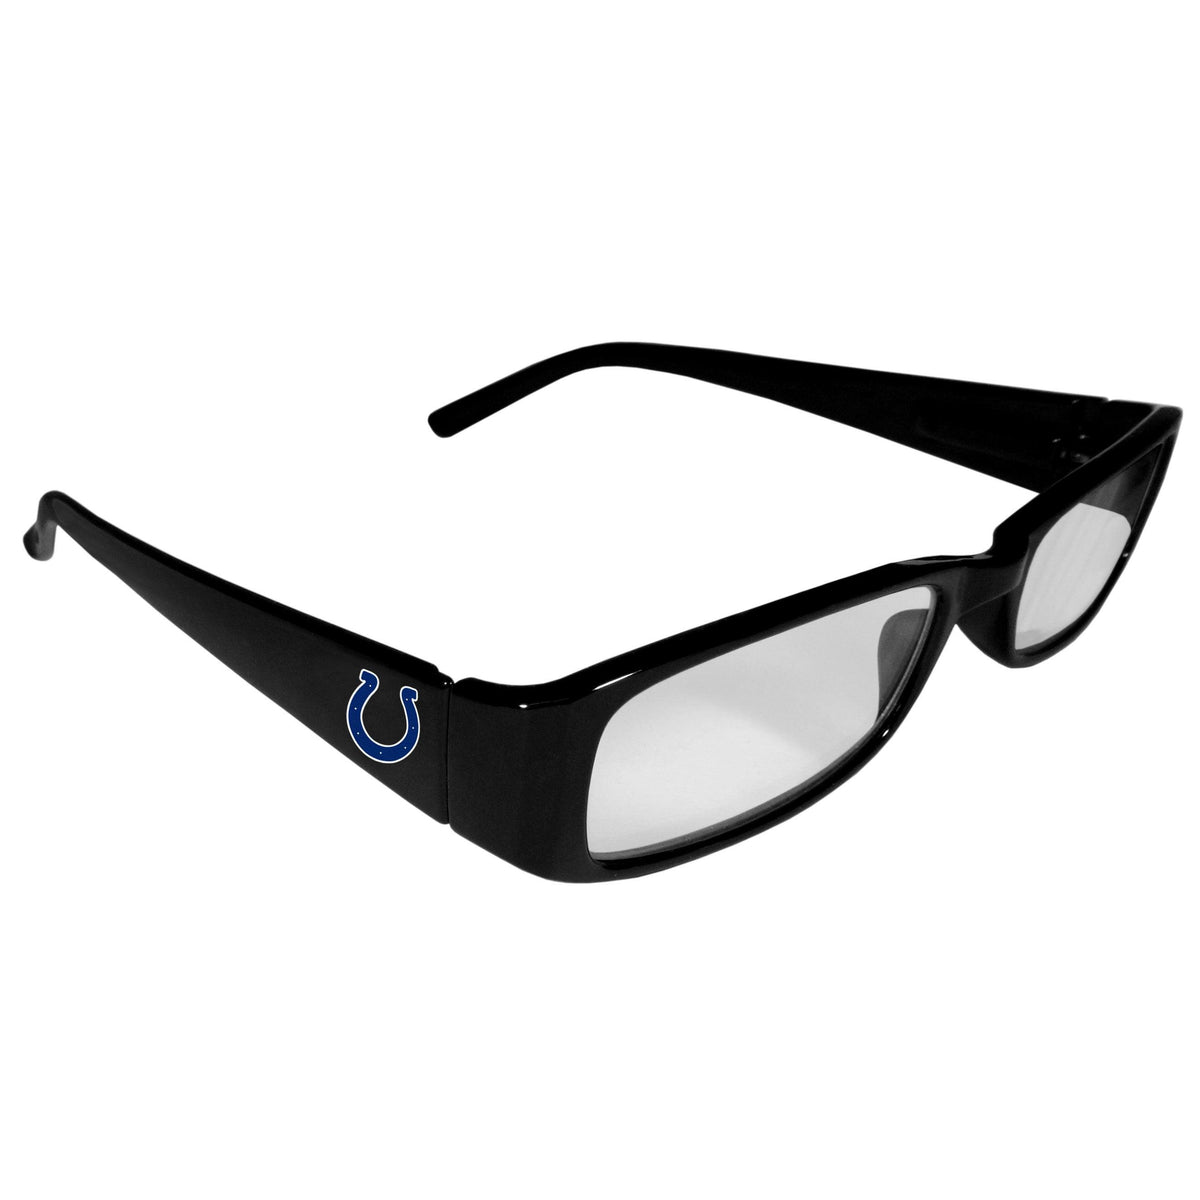 Indianapolis Colts Printed Reading Glasses, +1.75 - Flyclothing LLC